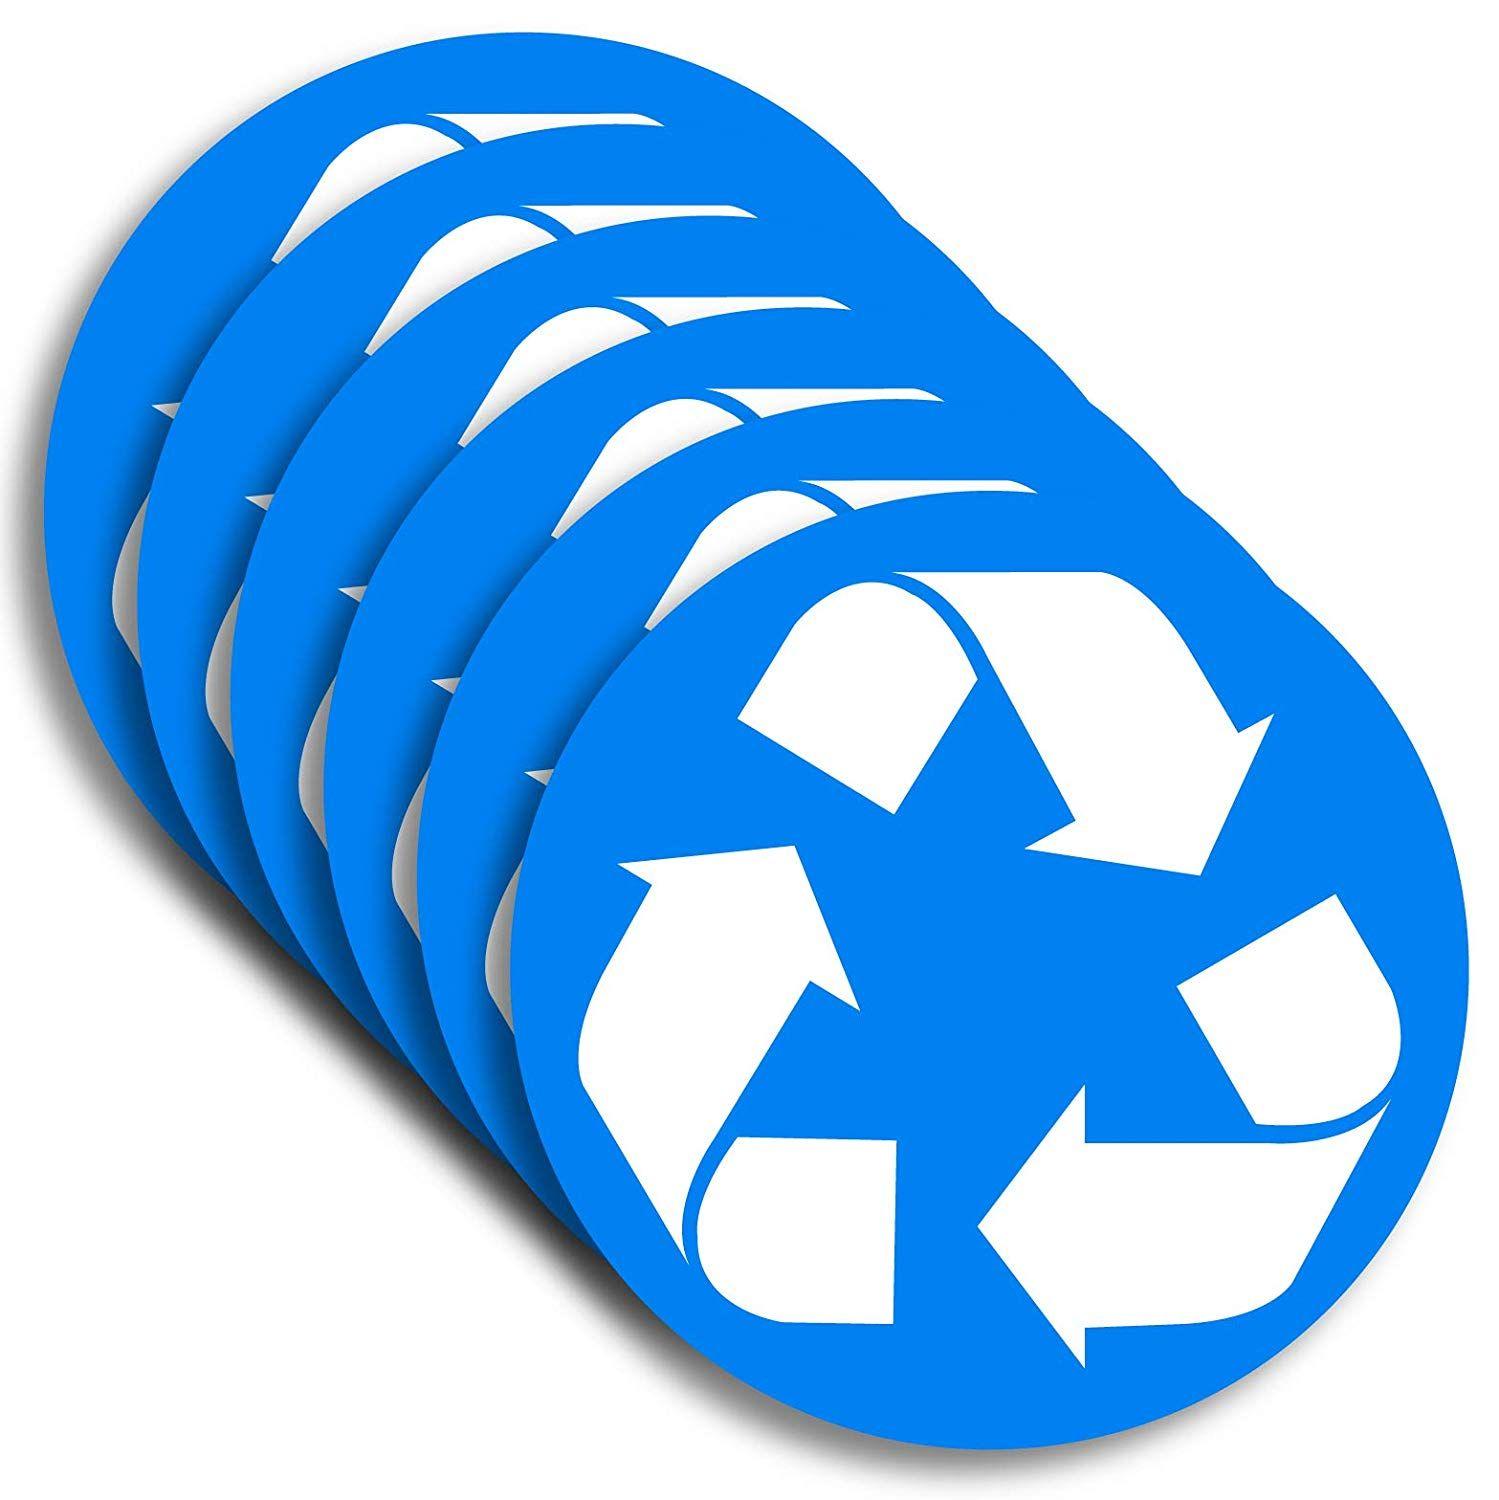 Blue Recycle Logo - Amazon.com: 6 Pack (5in x 5in White/Blue) Recycle Logo Sticker to ...